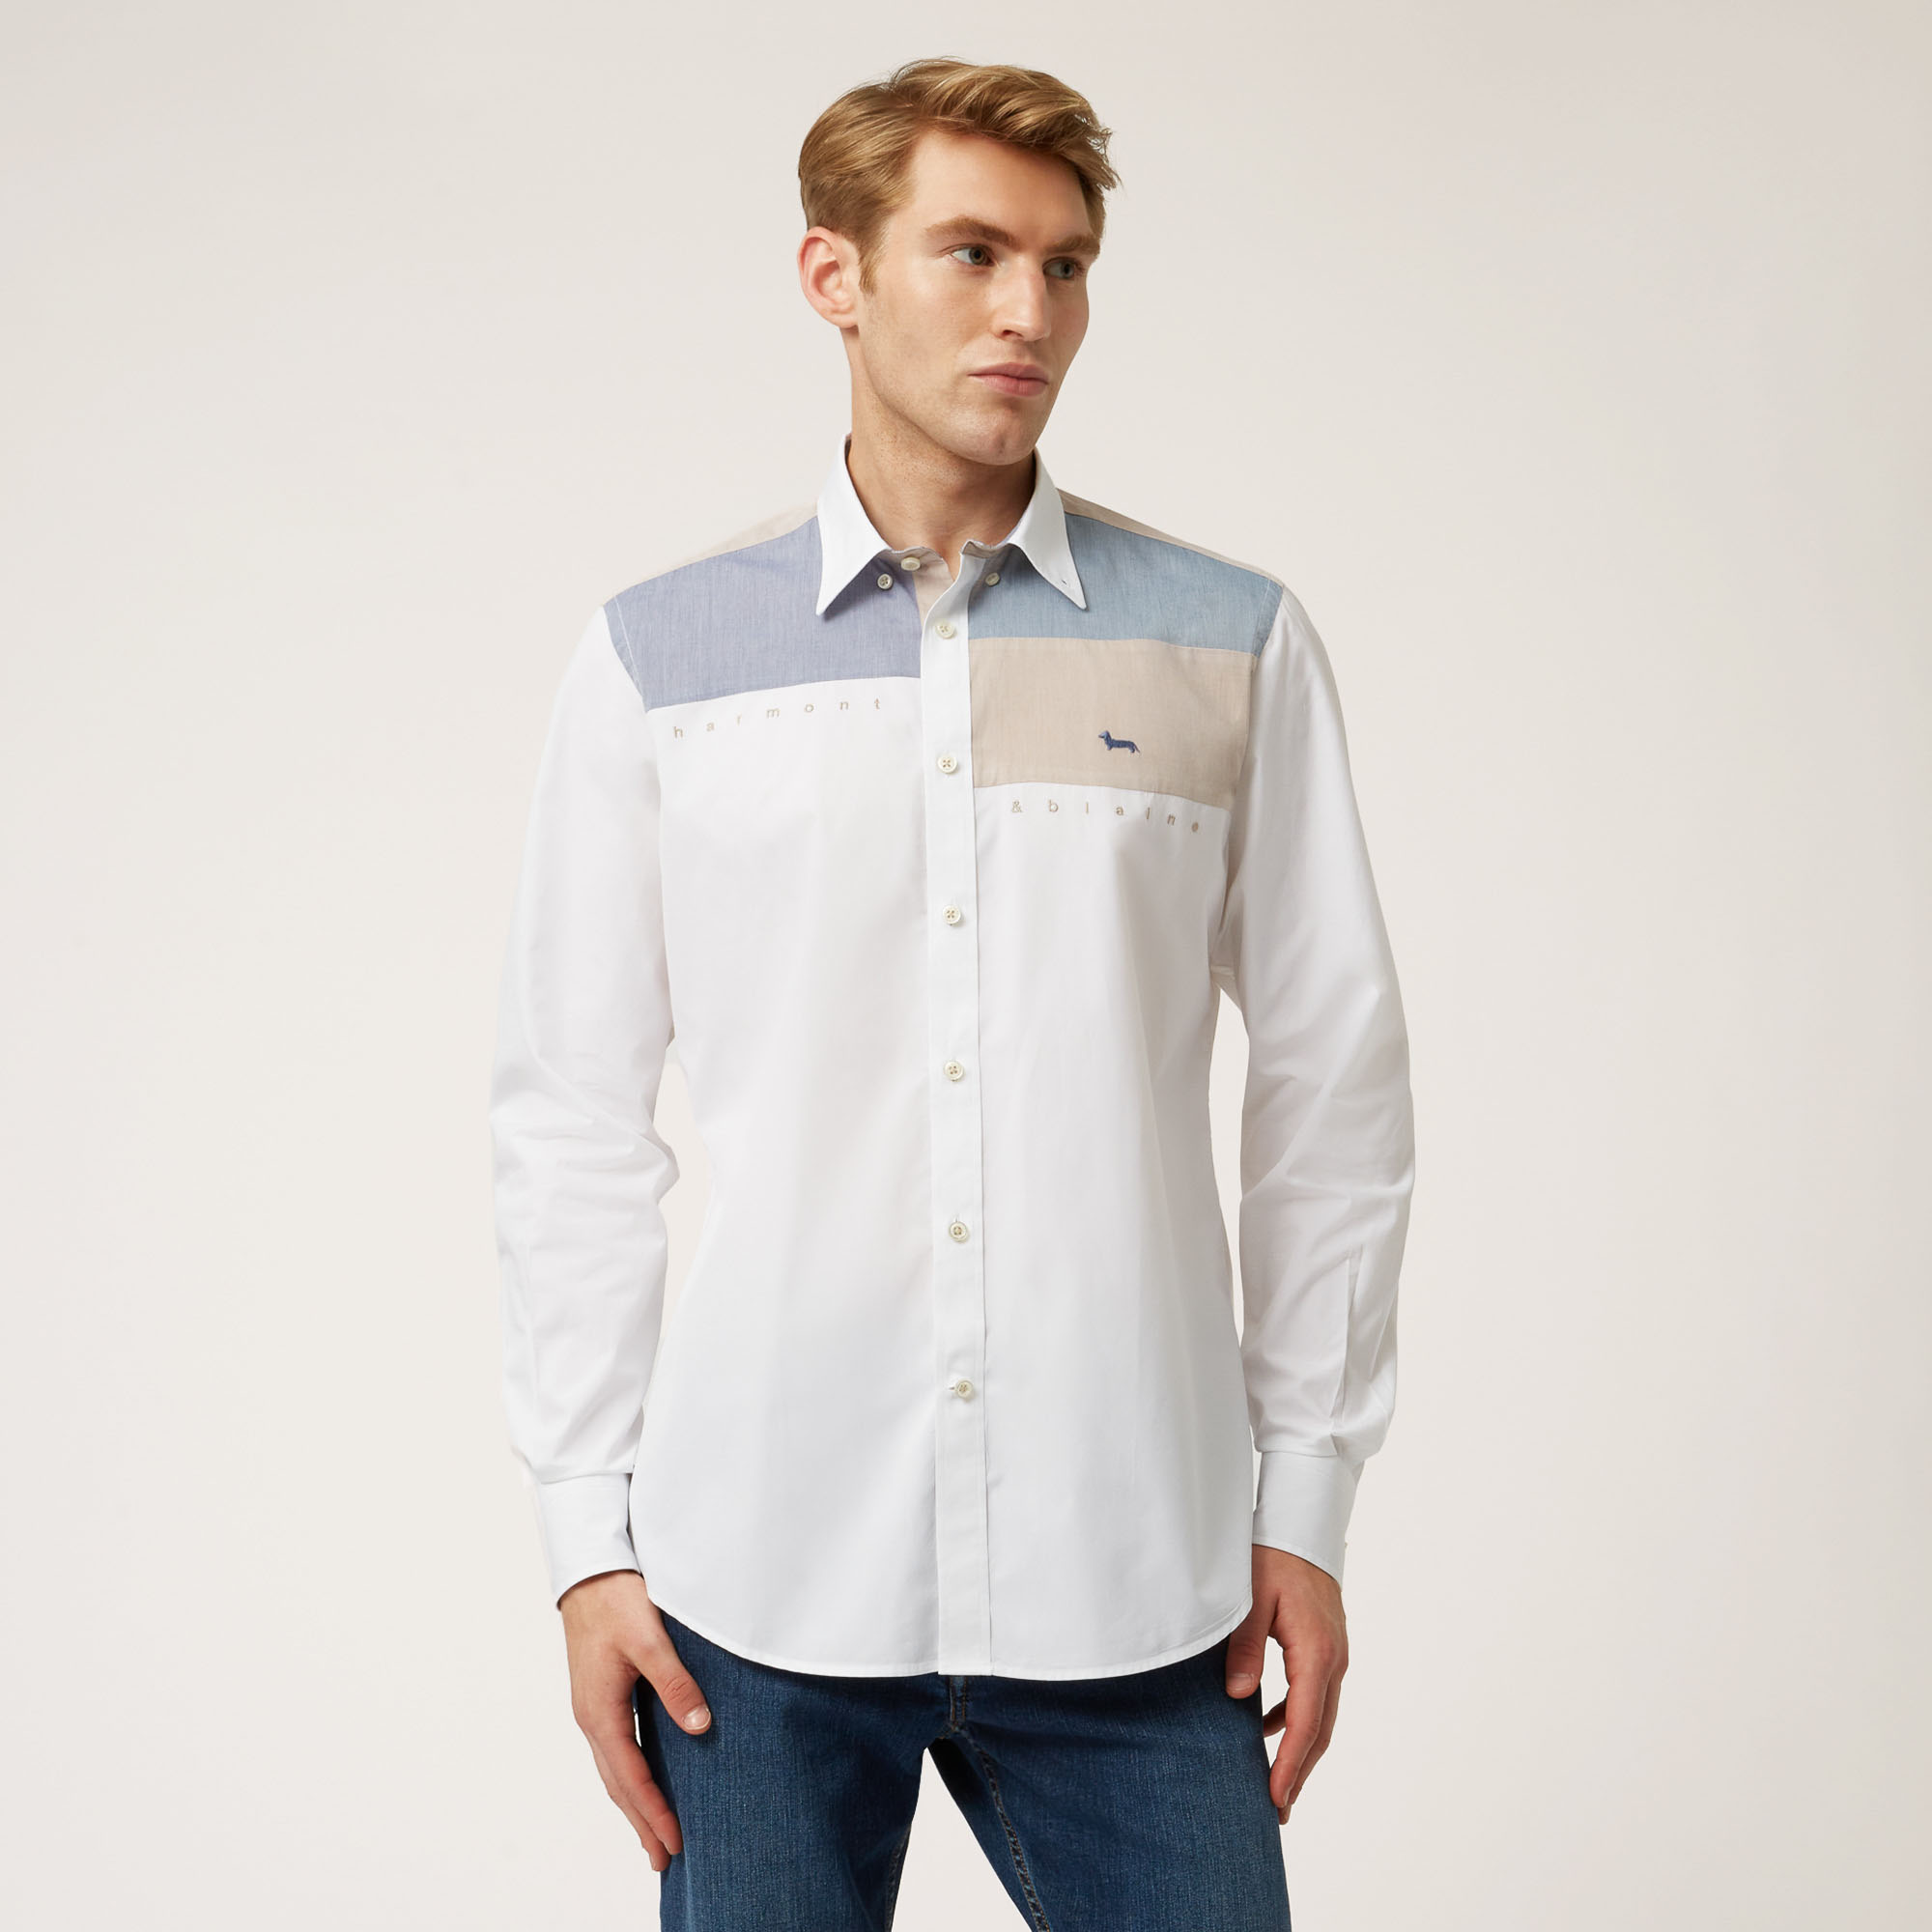 Camicia Con Patch E Lettering A Contrasto, Bianco, large image number 0